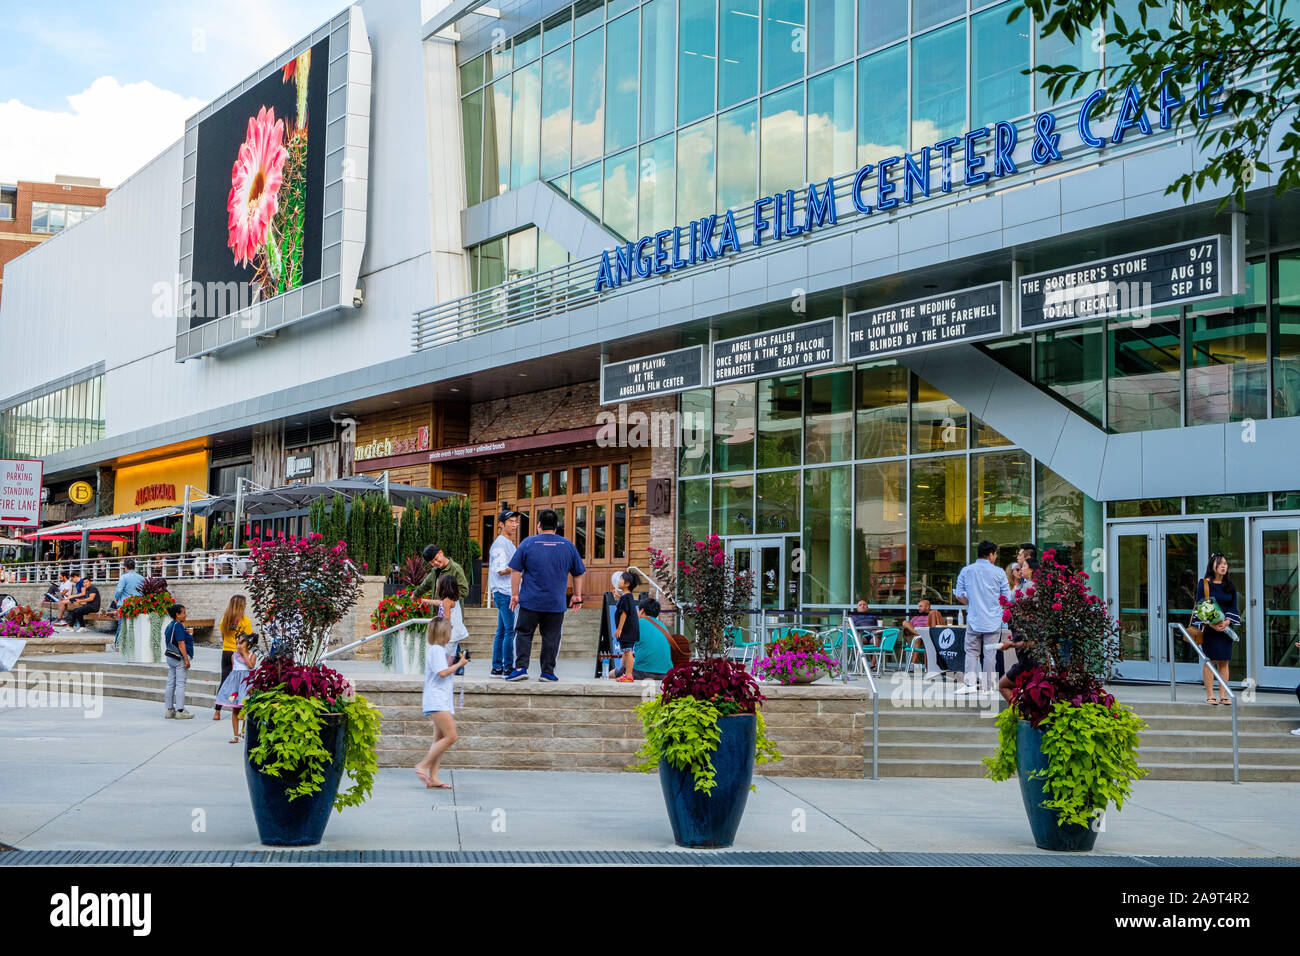 Angelika Film Center and Cafe, 2911 District Avenue, Merrifield, Virginia Stock Photo